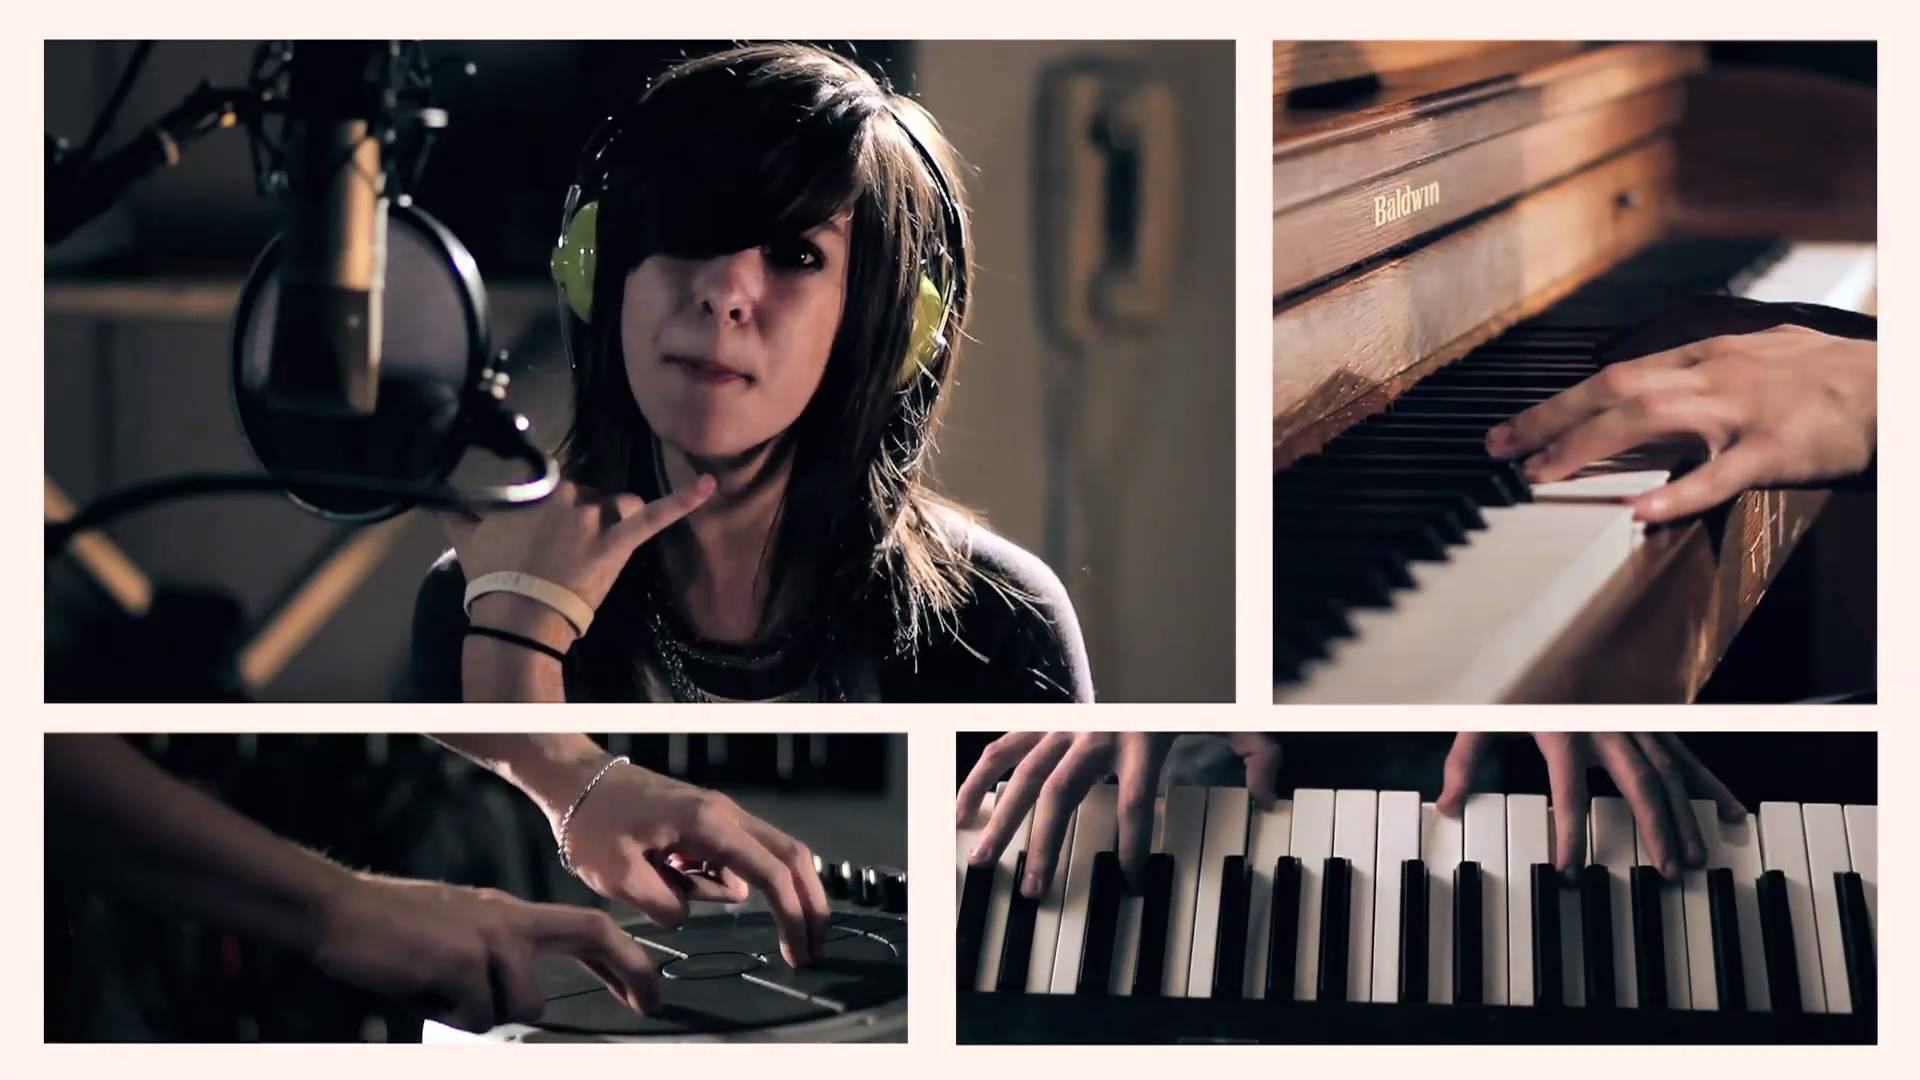 "Just A Dream" by Nelly - Sam Tsui & Christina Grimmie